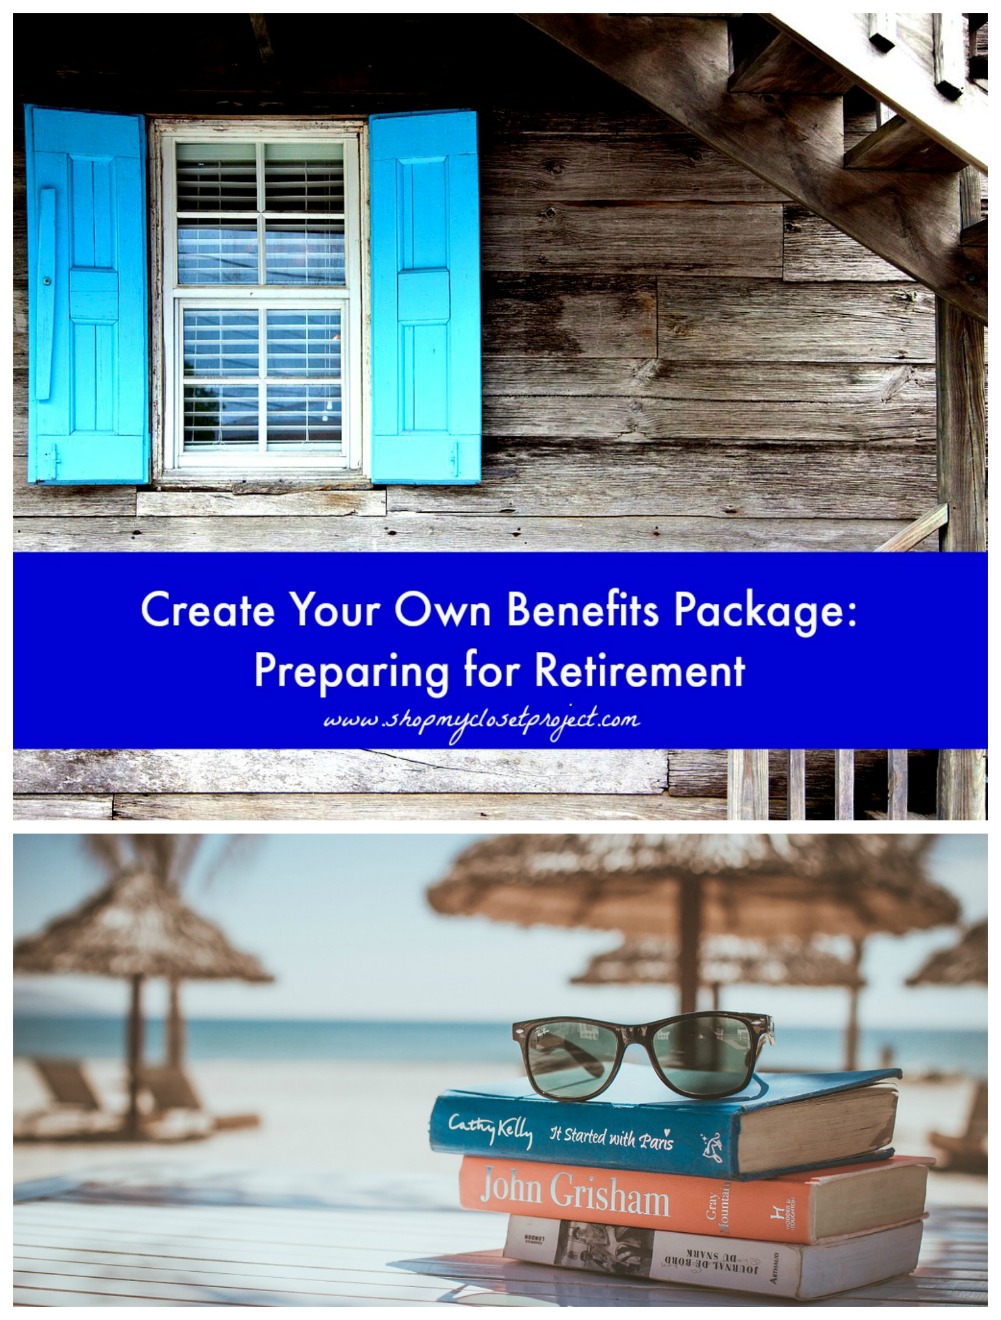 Create Your Own Benefits Package: Preparing for Retirement